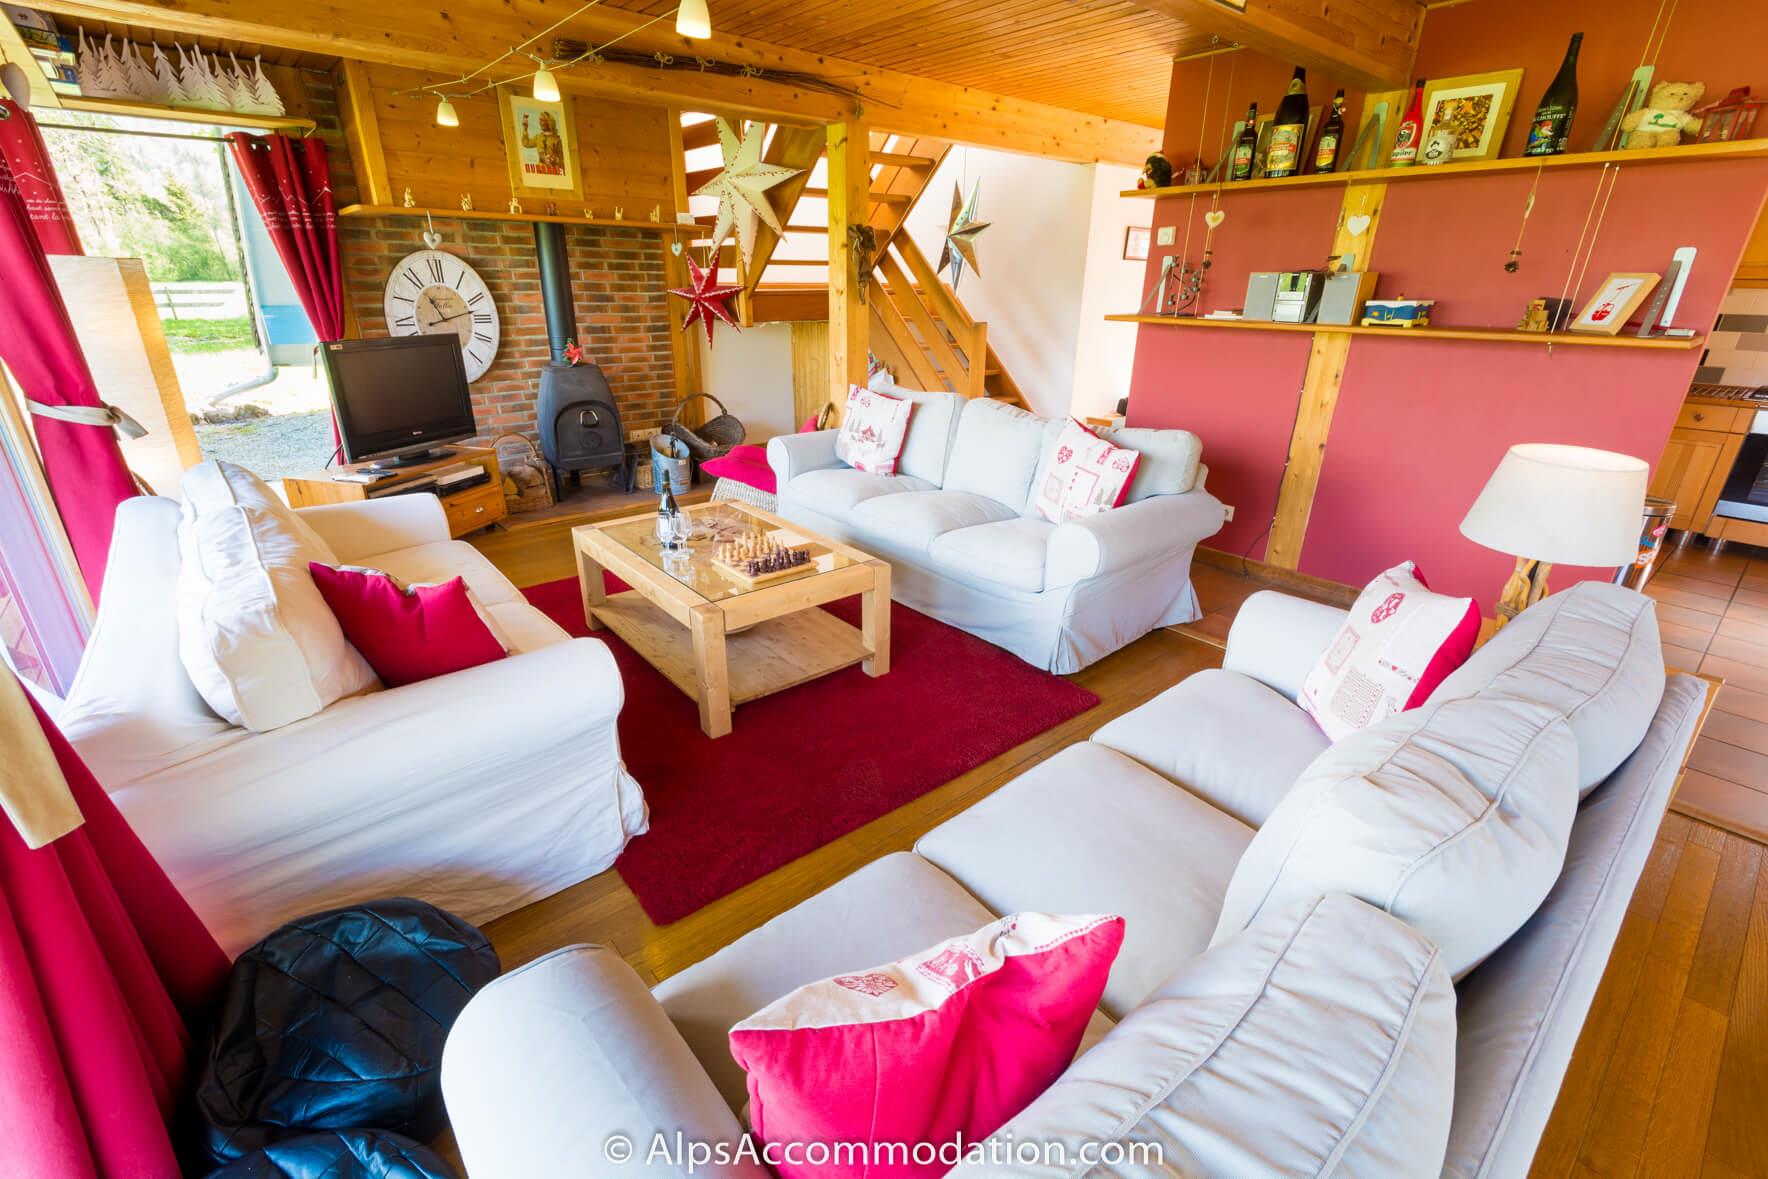 Chalet Bleu Morillon - Cosy nights in front of the log burner are a must